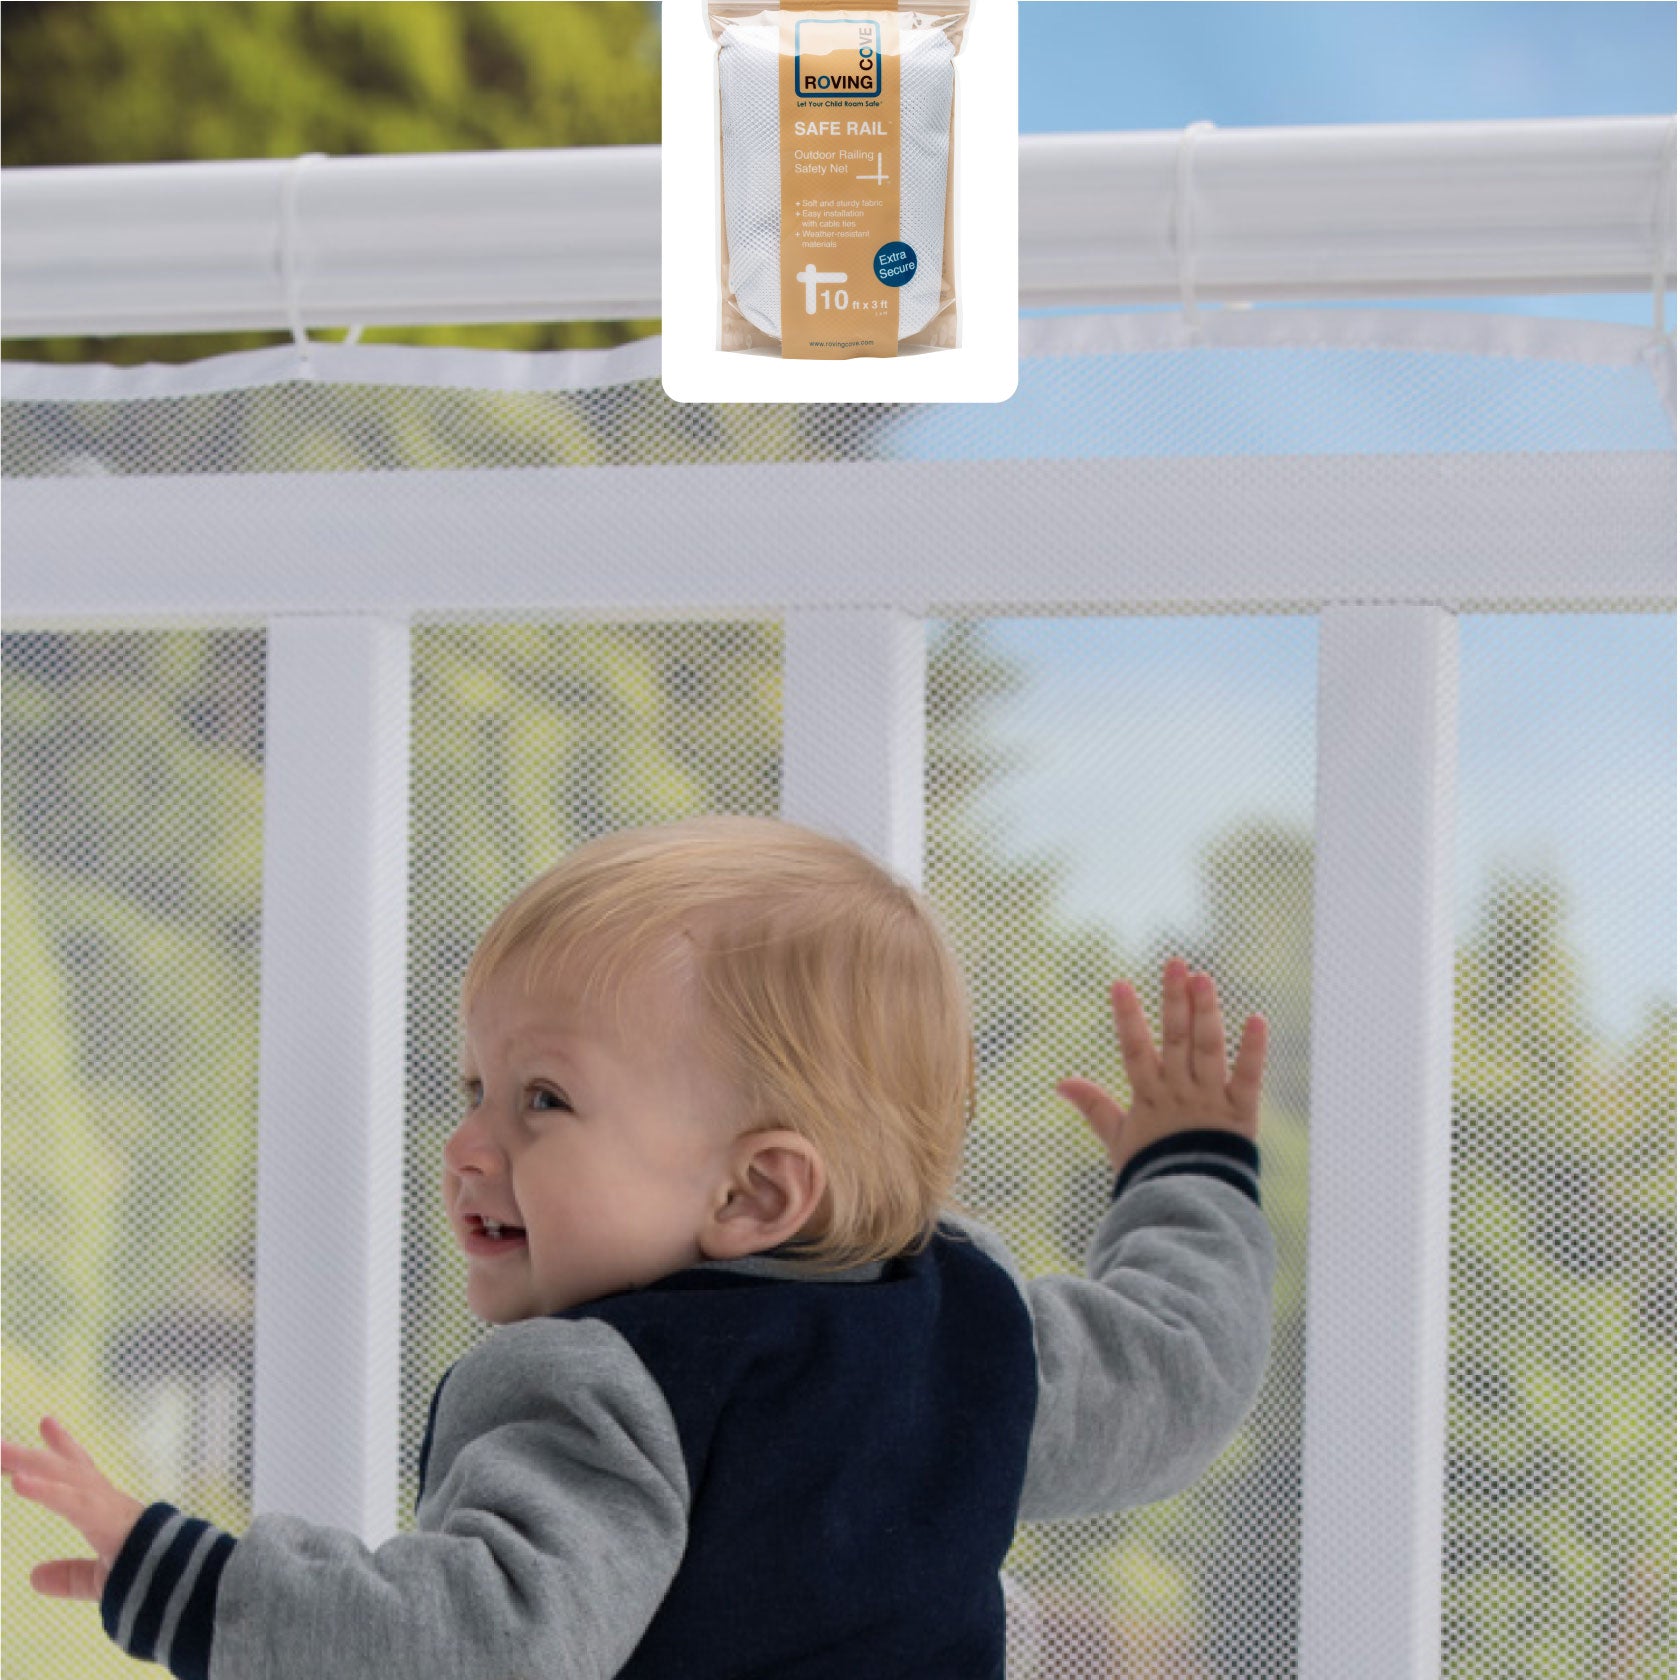 Roving Cove Indoor and Outdoor Banister Guard and Railing Safety Net for baby proofing stairway railing, deck, patio, balcony and beyond. Keep your babies, pets and toys from falling through banisters. Available on Amazon. 